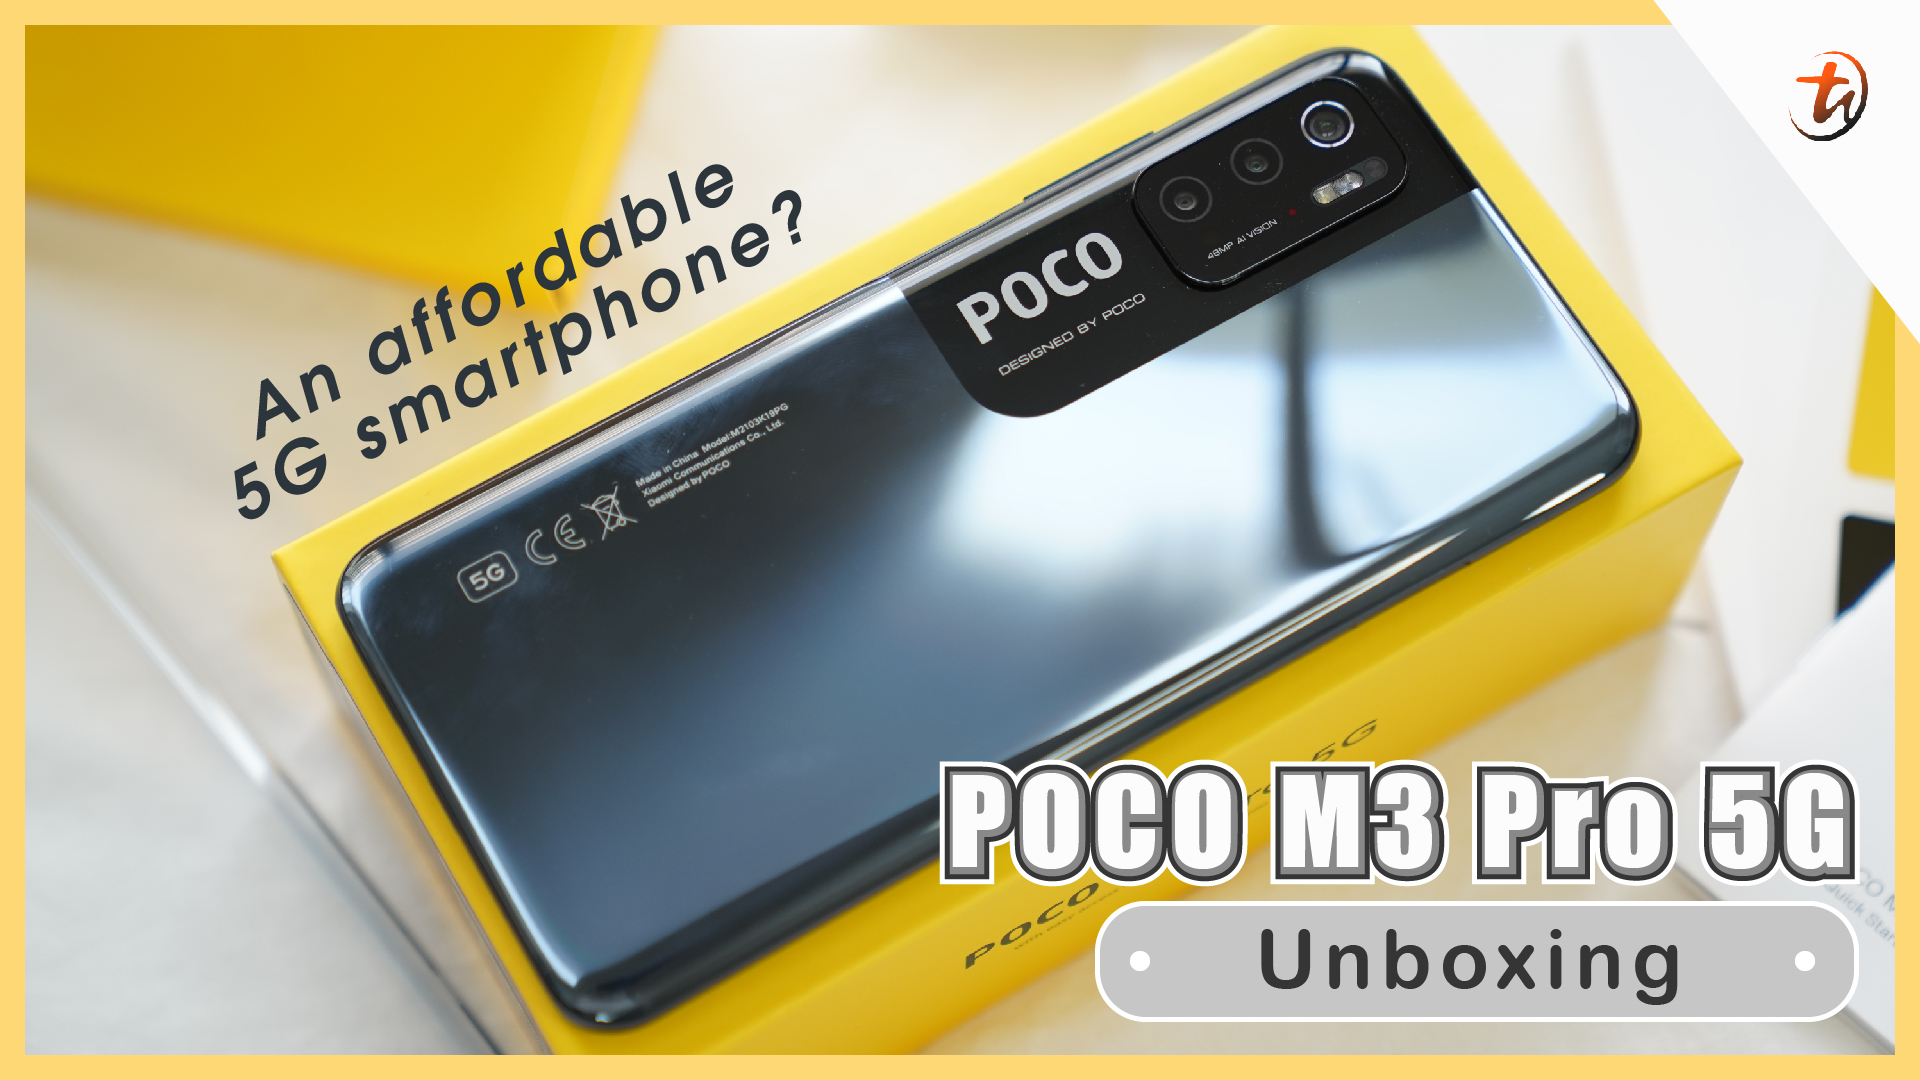 POCO M3 Pro 5G - An affordable 5G device?  | TechNave Unboxing and Hands-On Video